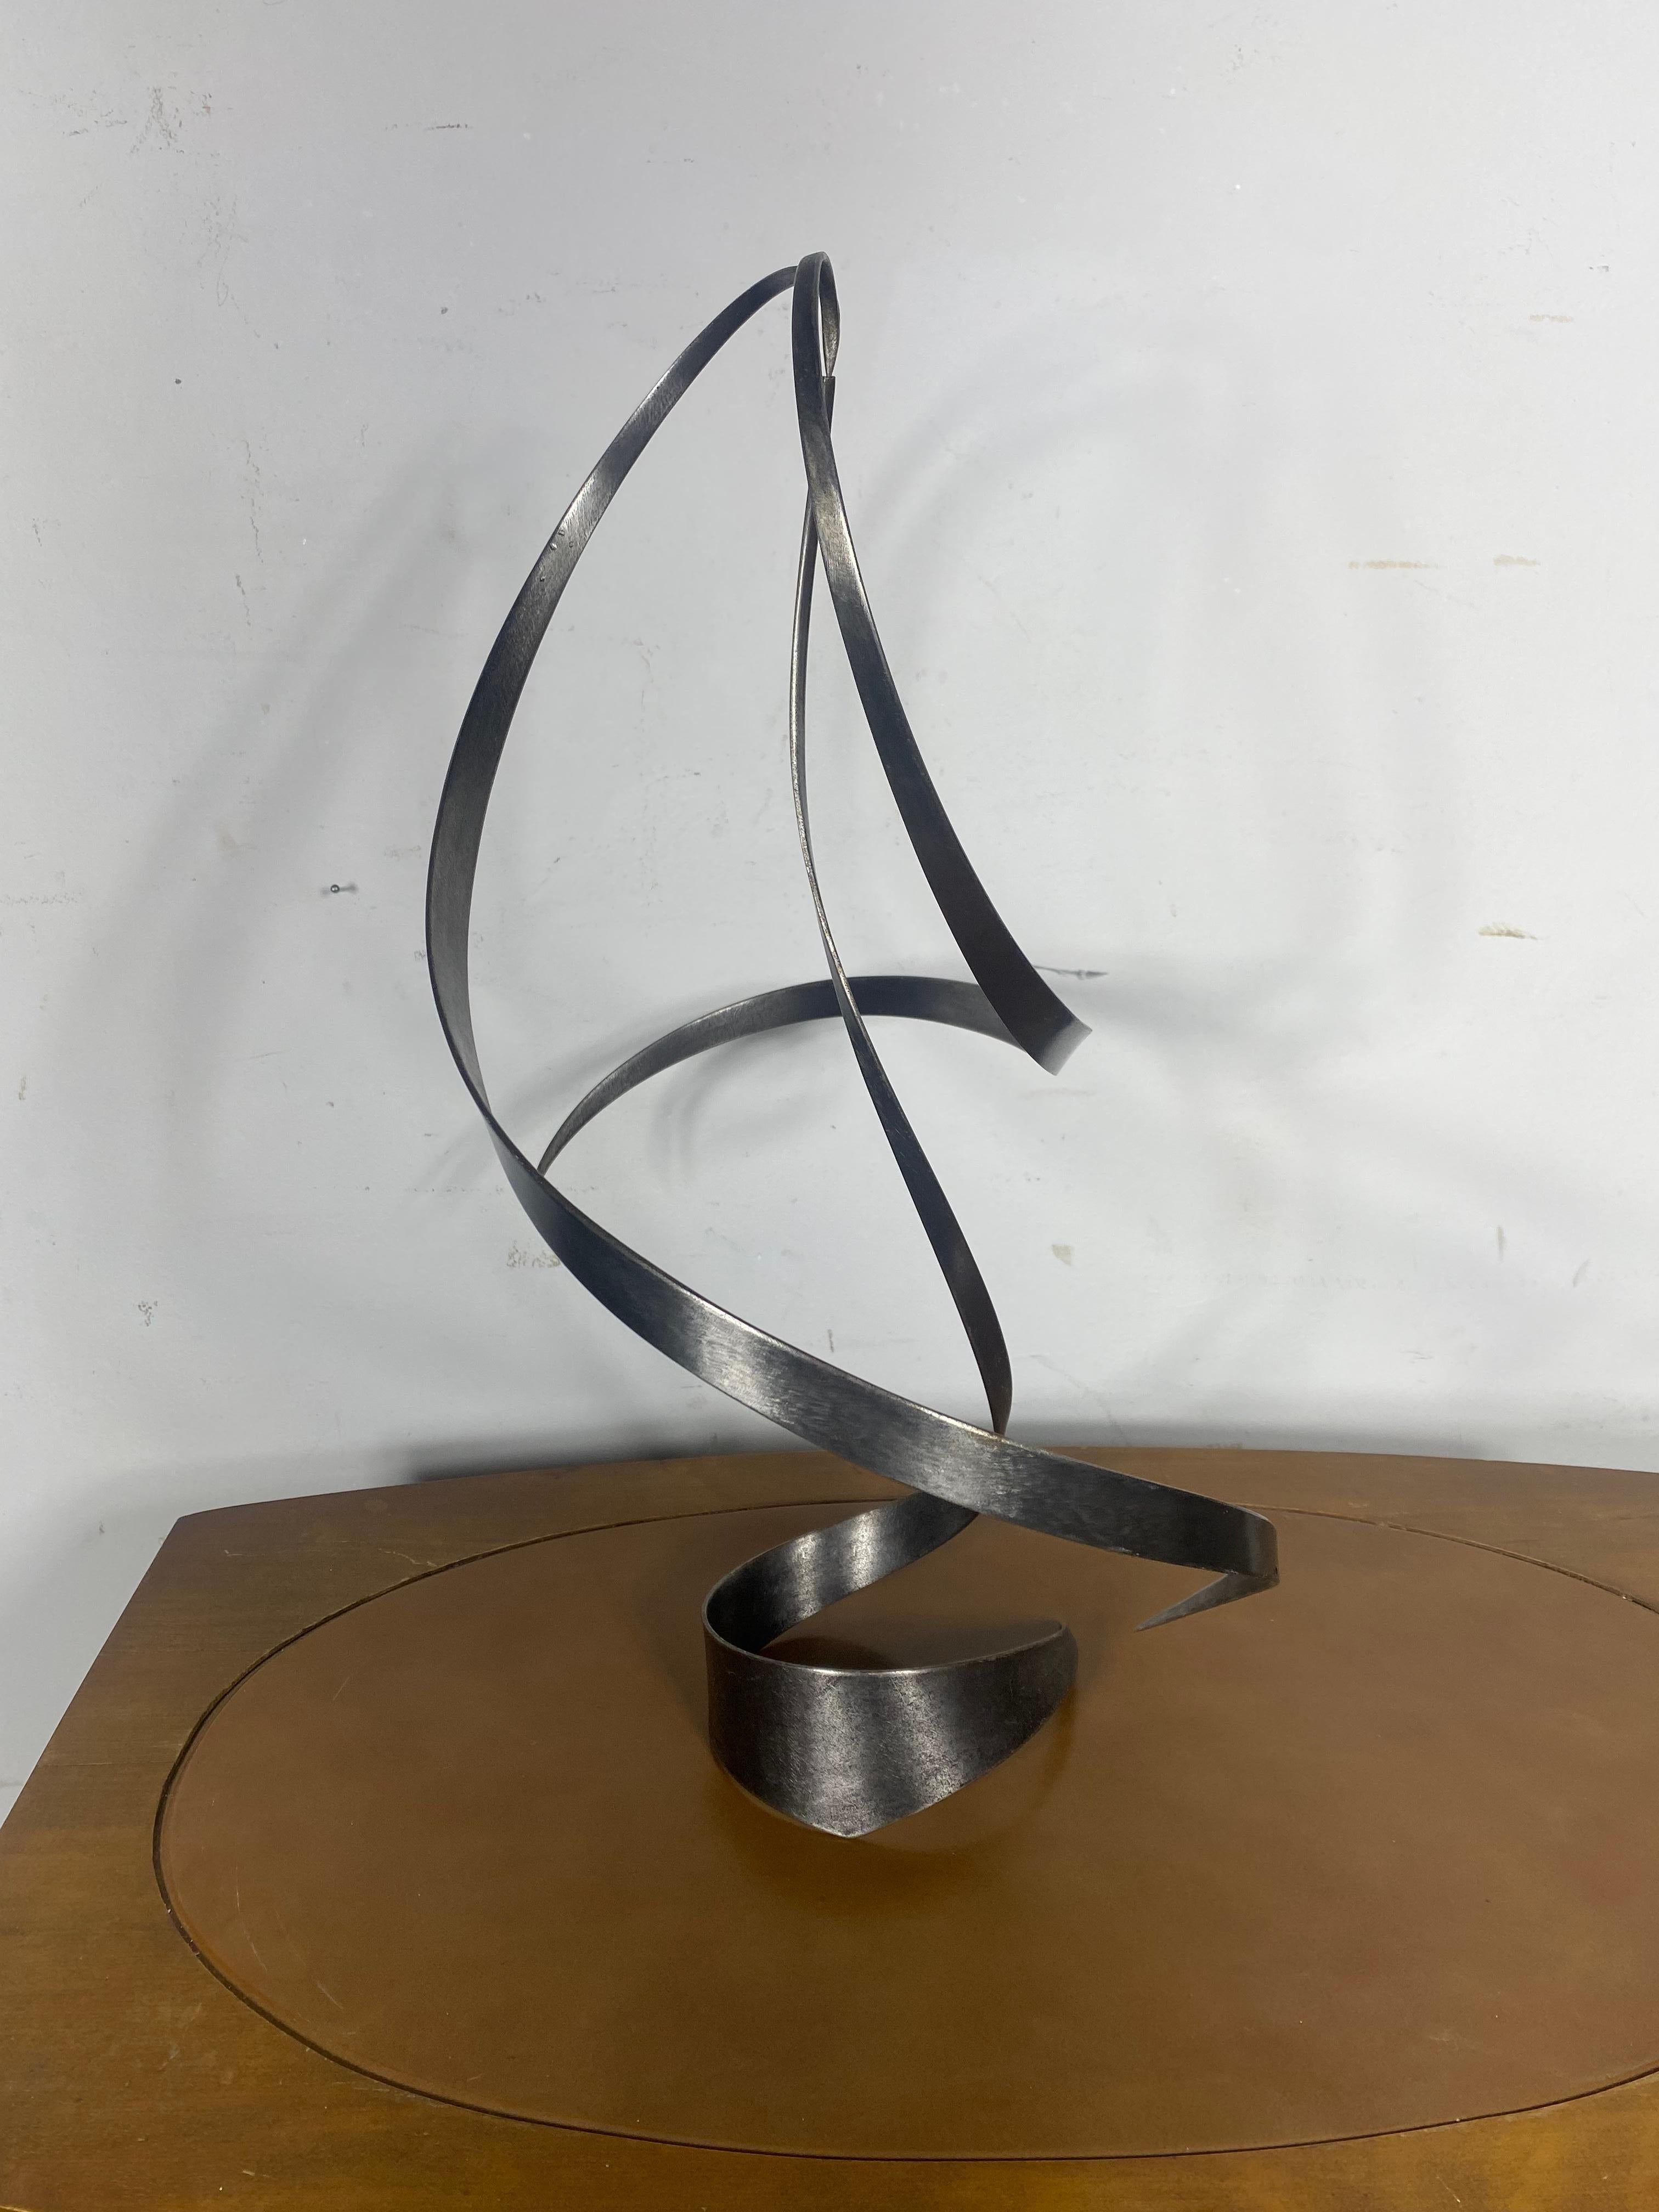 Wonderful Spiral Steel Kinetic Stabile / Mobile Sculpture by Sam Ogden constructed of two pieces of hammered , sculpted steel, top piece balances. (PLEASE CHECK VIDEO),

Ogden was born in Elizabeth, NJ, then moved to Vermont as a child. He returned